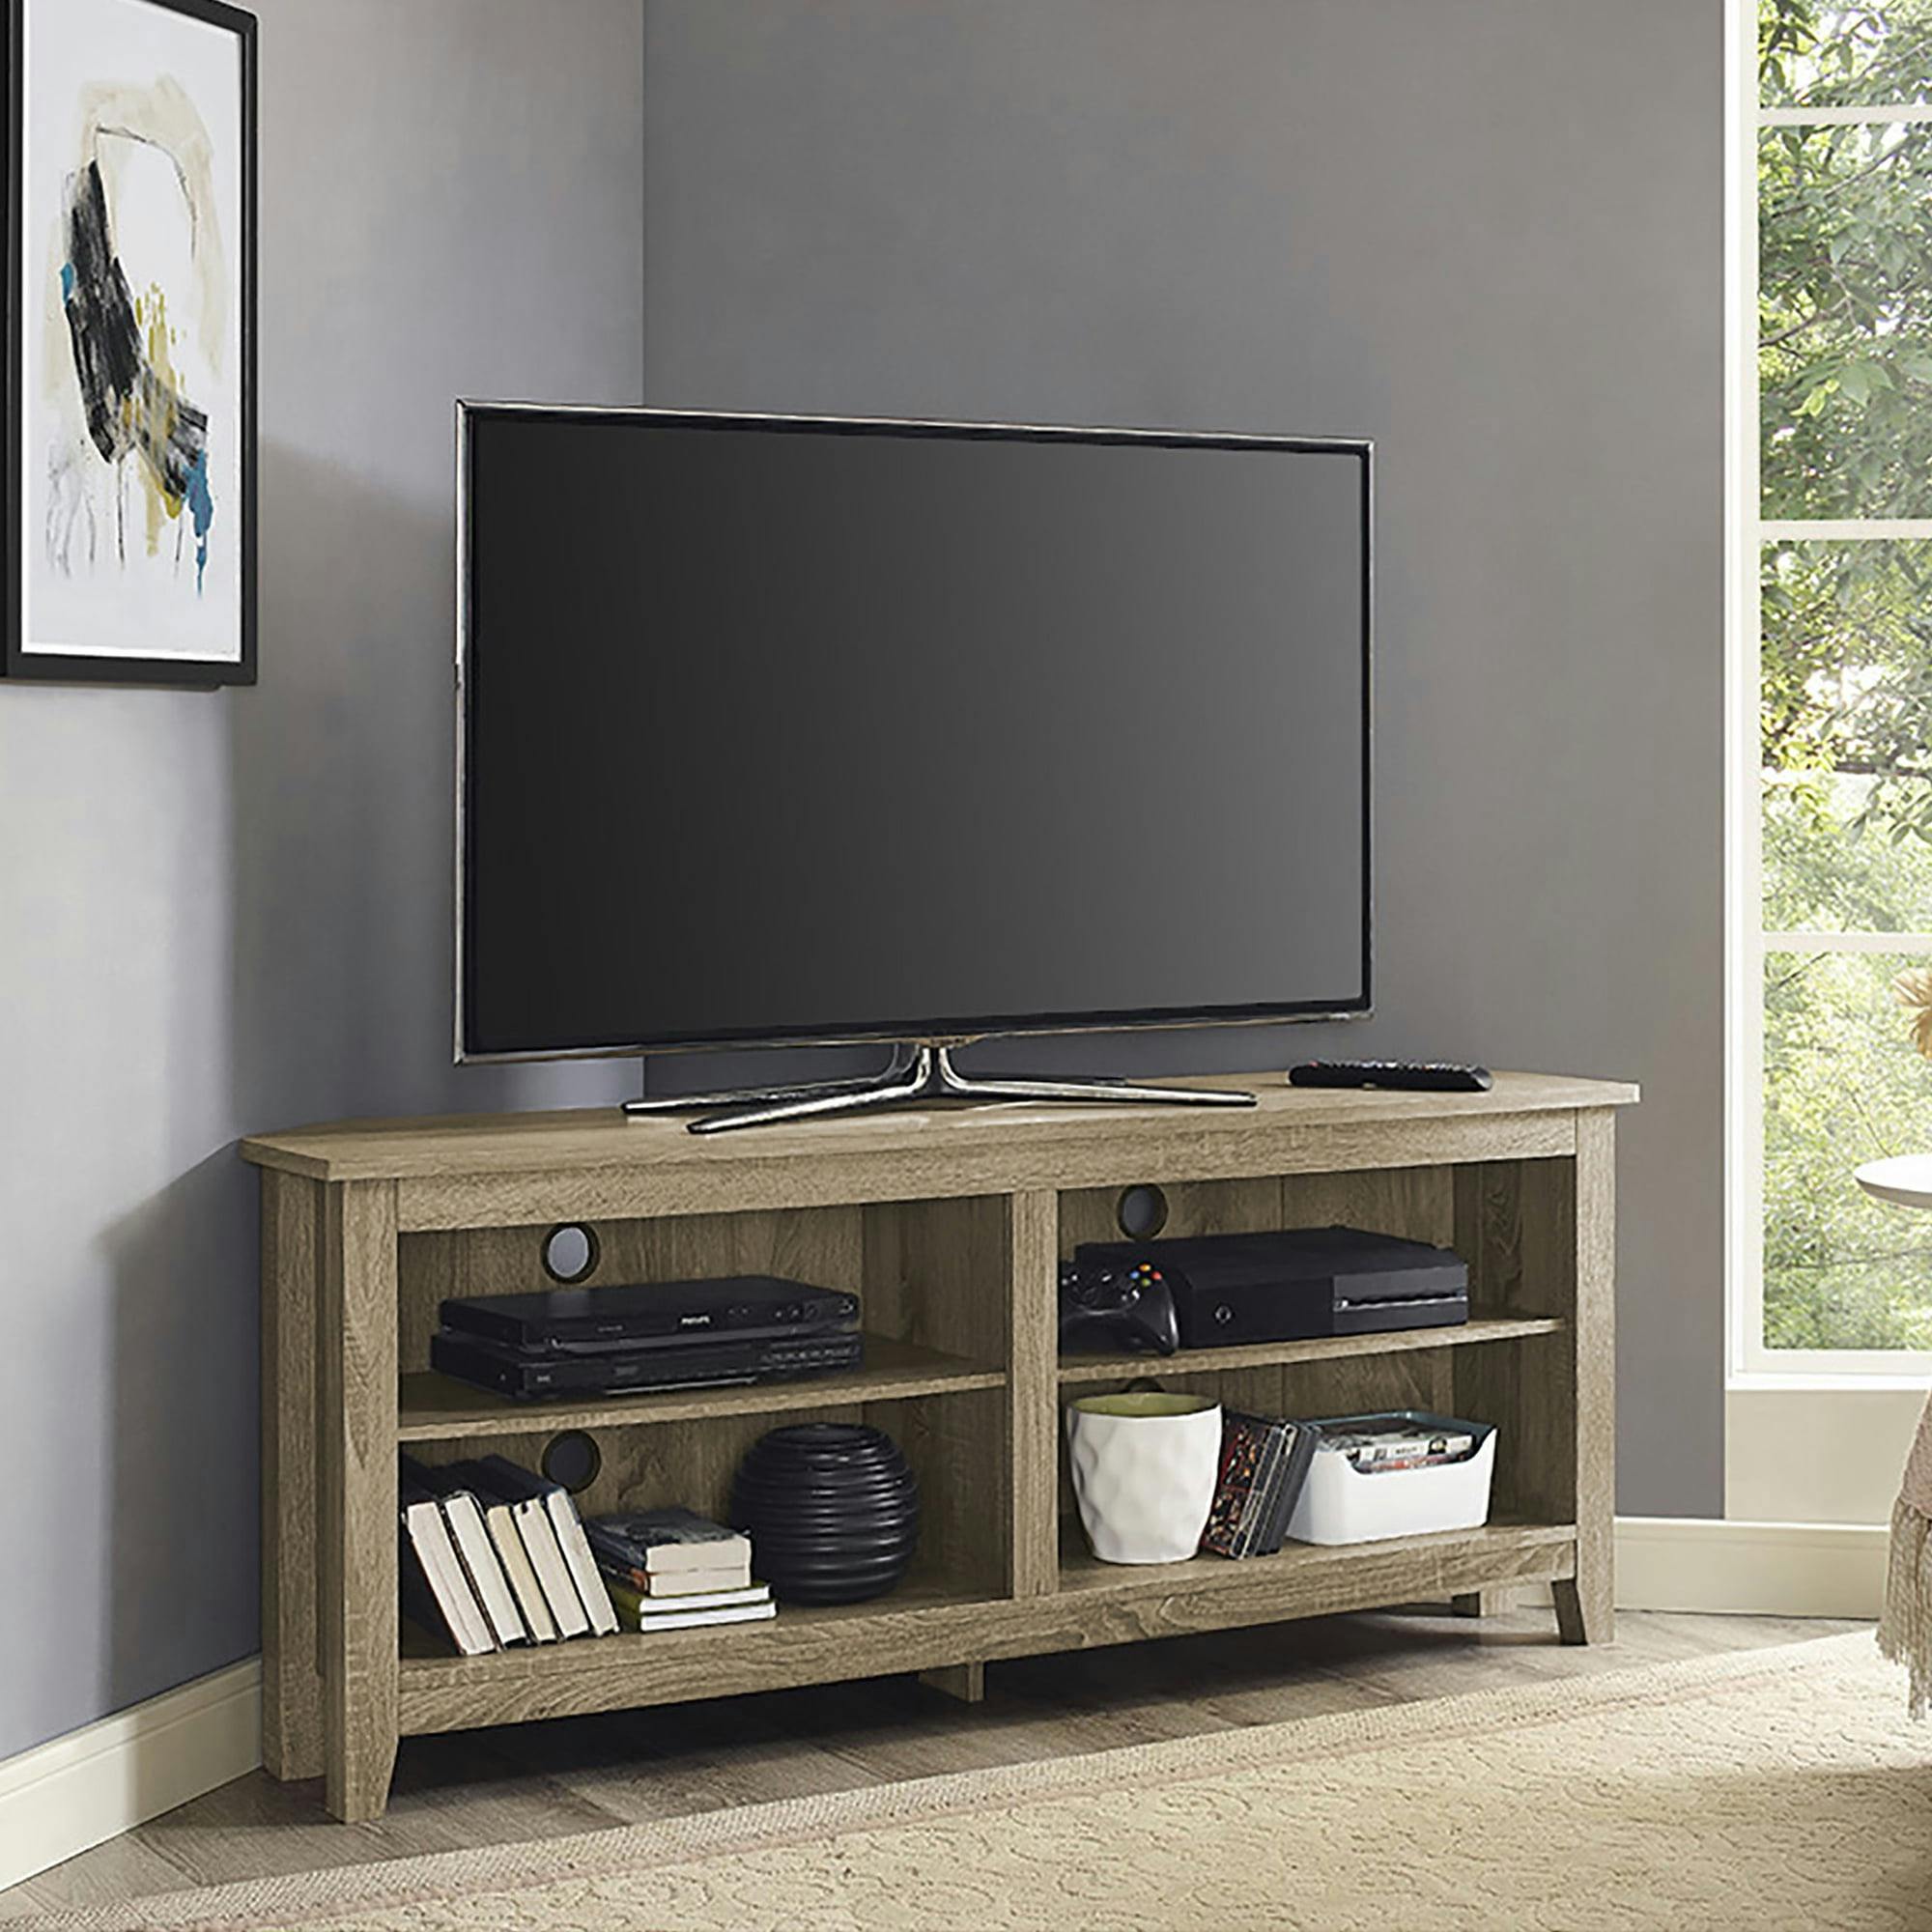 Rustic Corner Media Stand for 65" TVs in Driftwood Finish